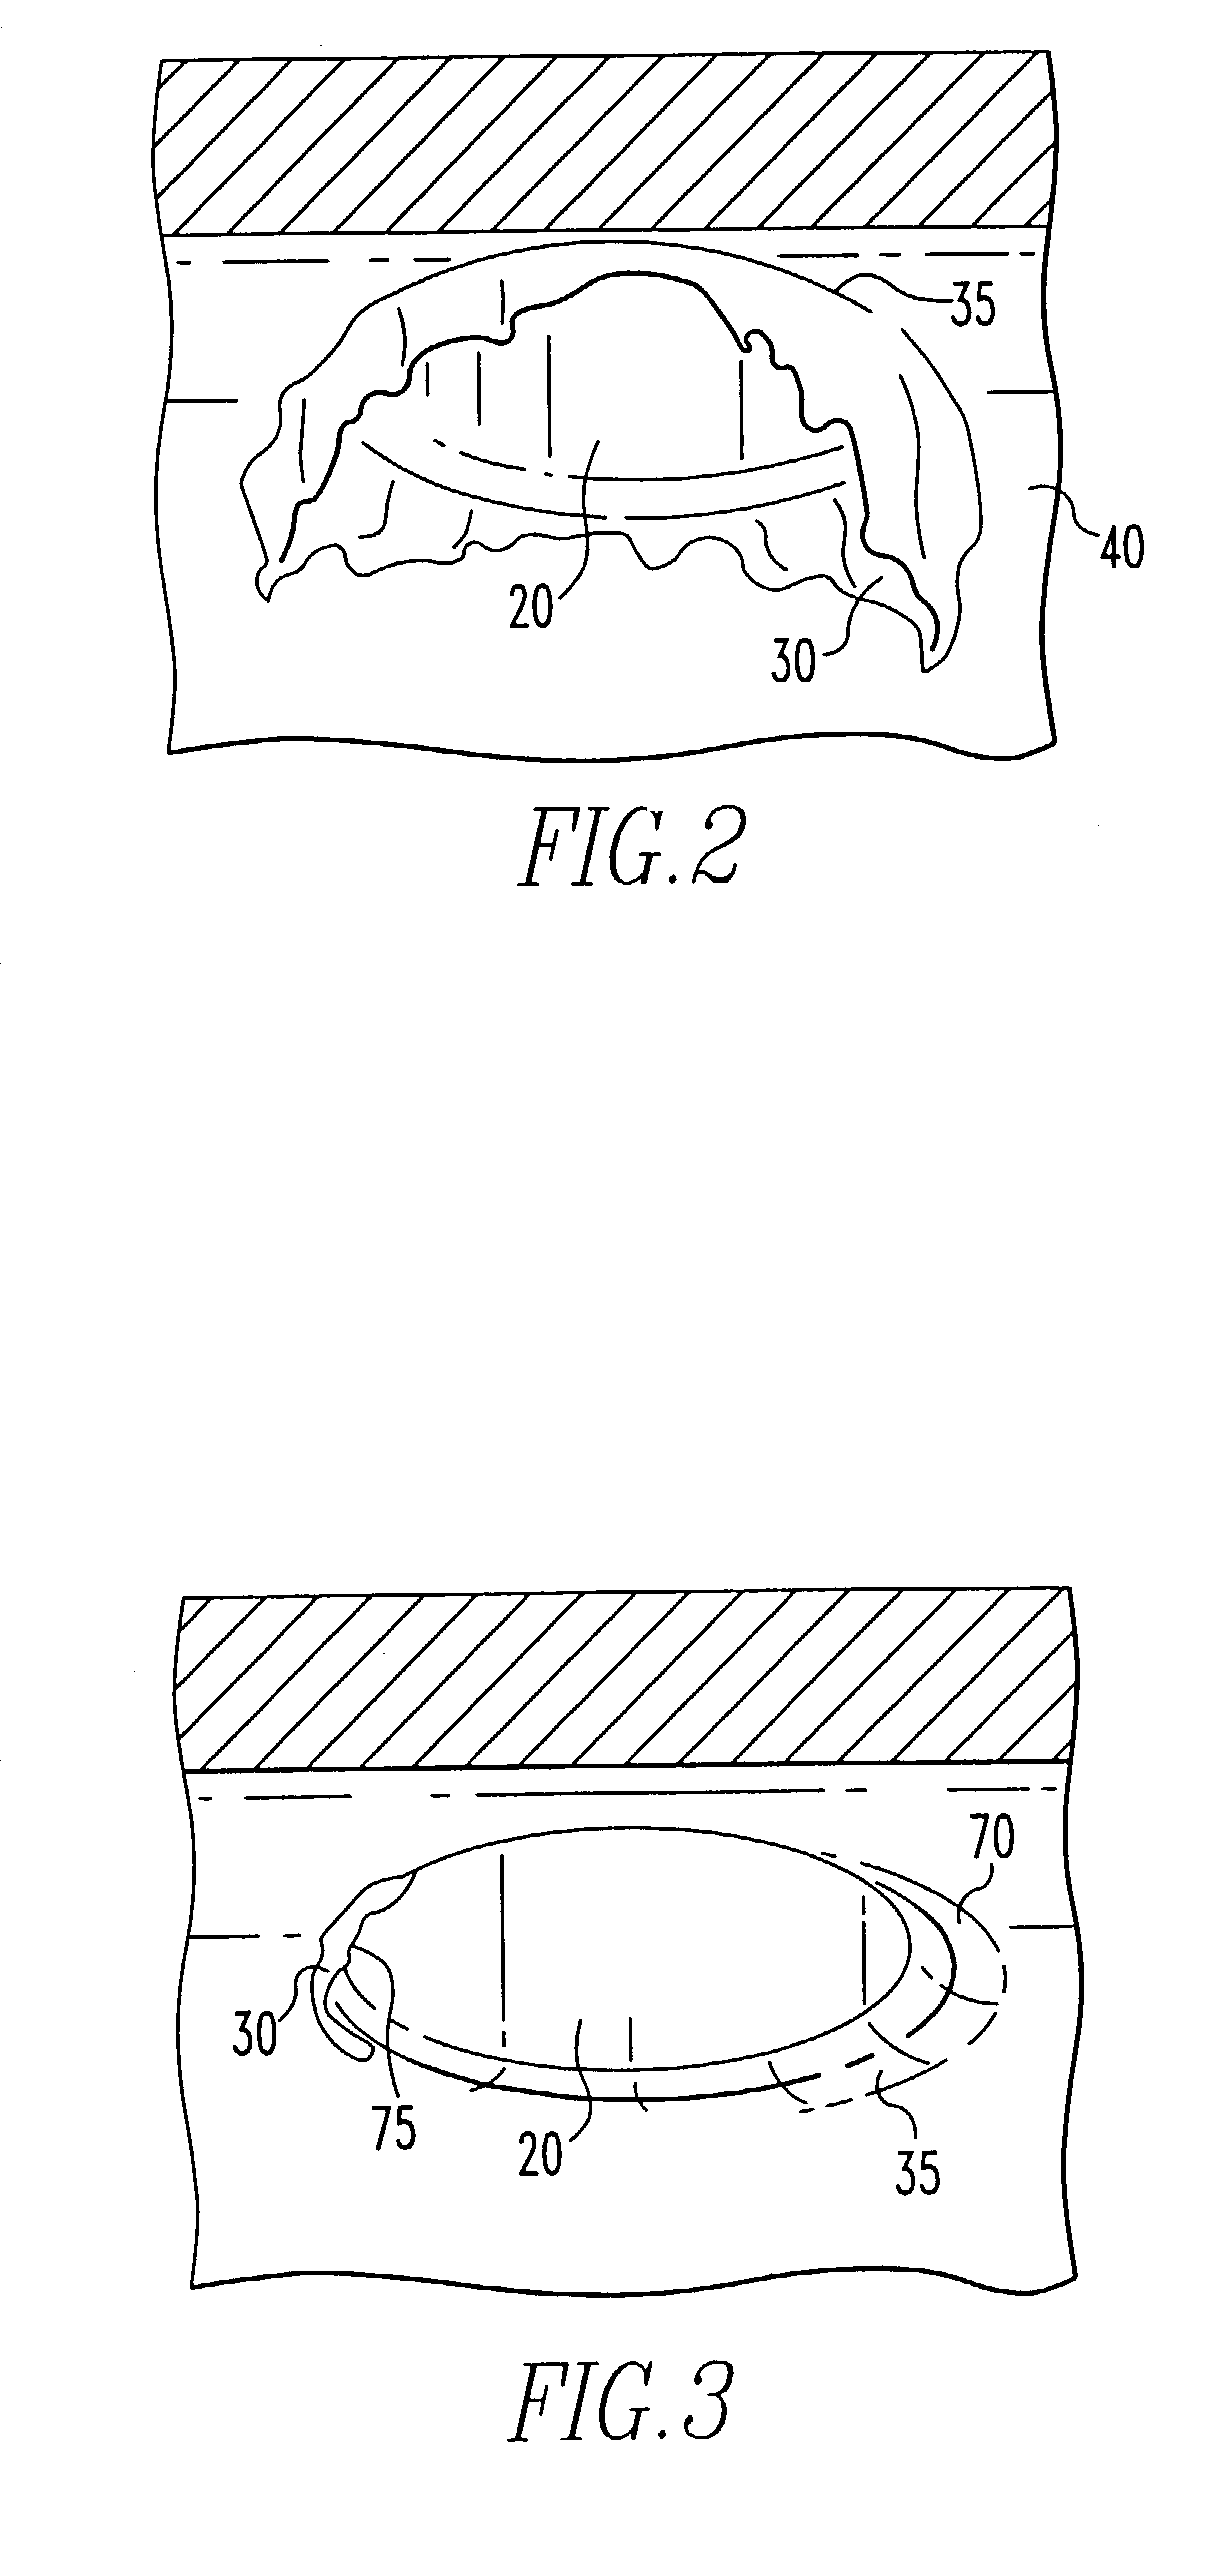 Method and apparatus for abrading the region of intersection between a branch outlet and a passageway in a body